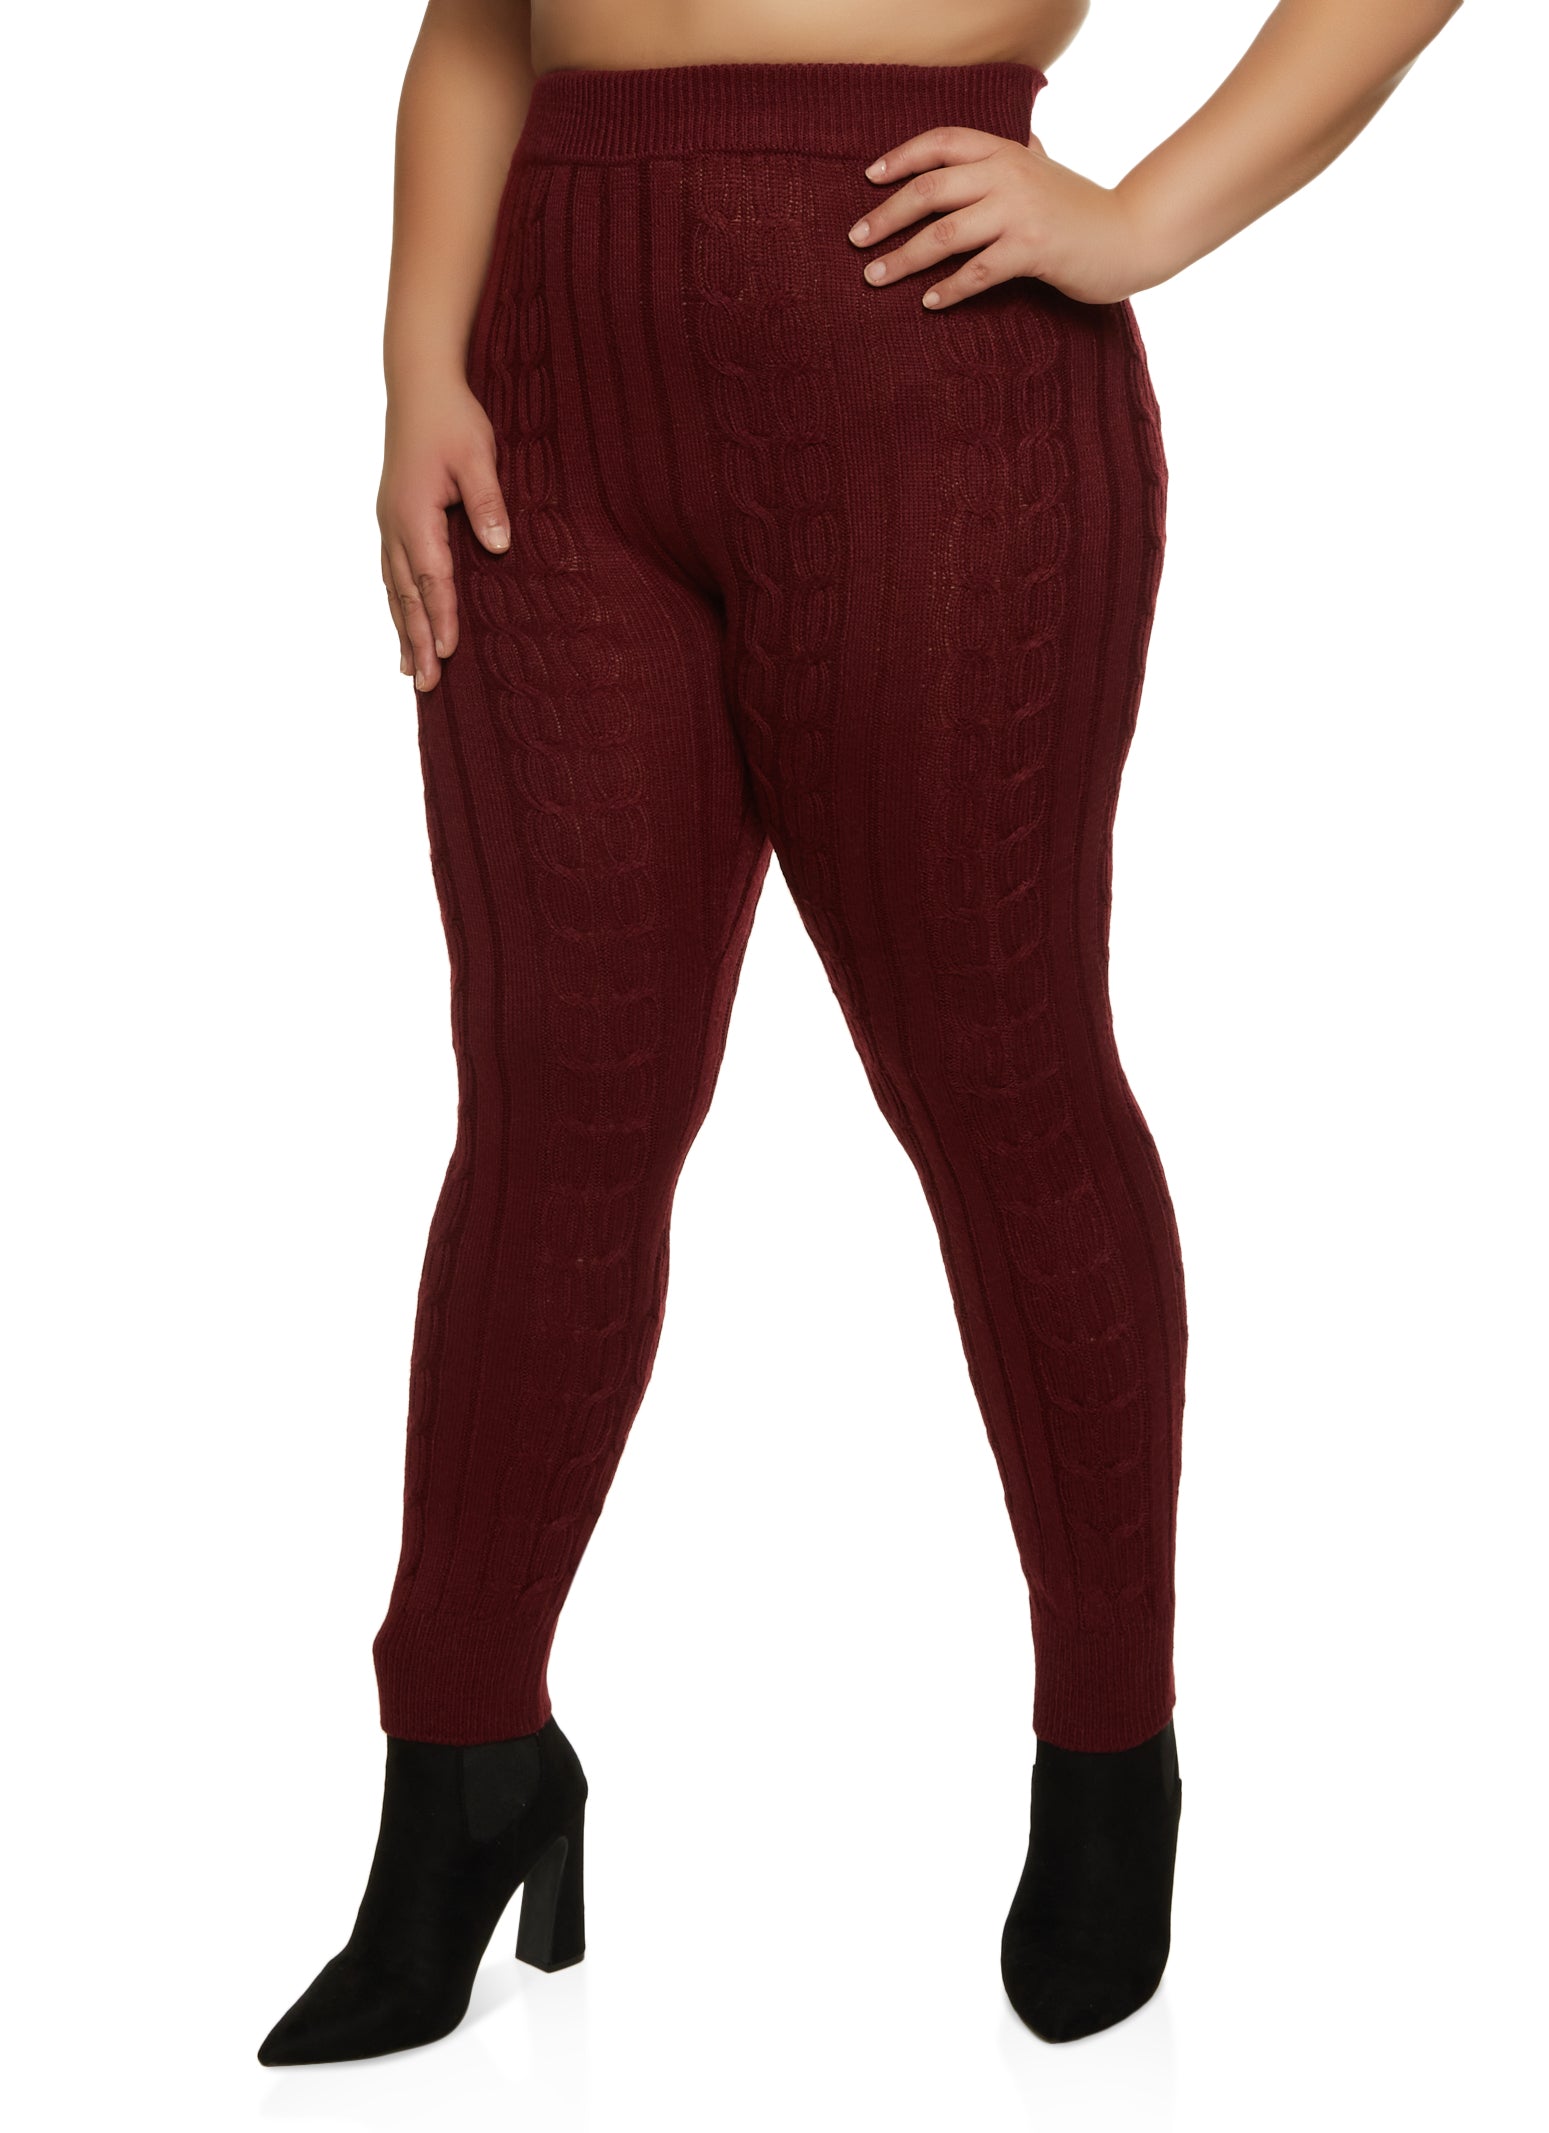 Rainbow Shops Womens Plus Size Cable Knit High Waisted Leggings